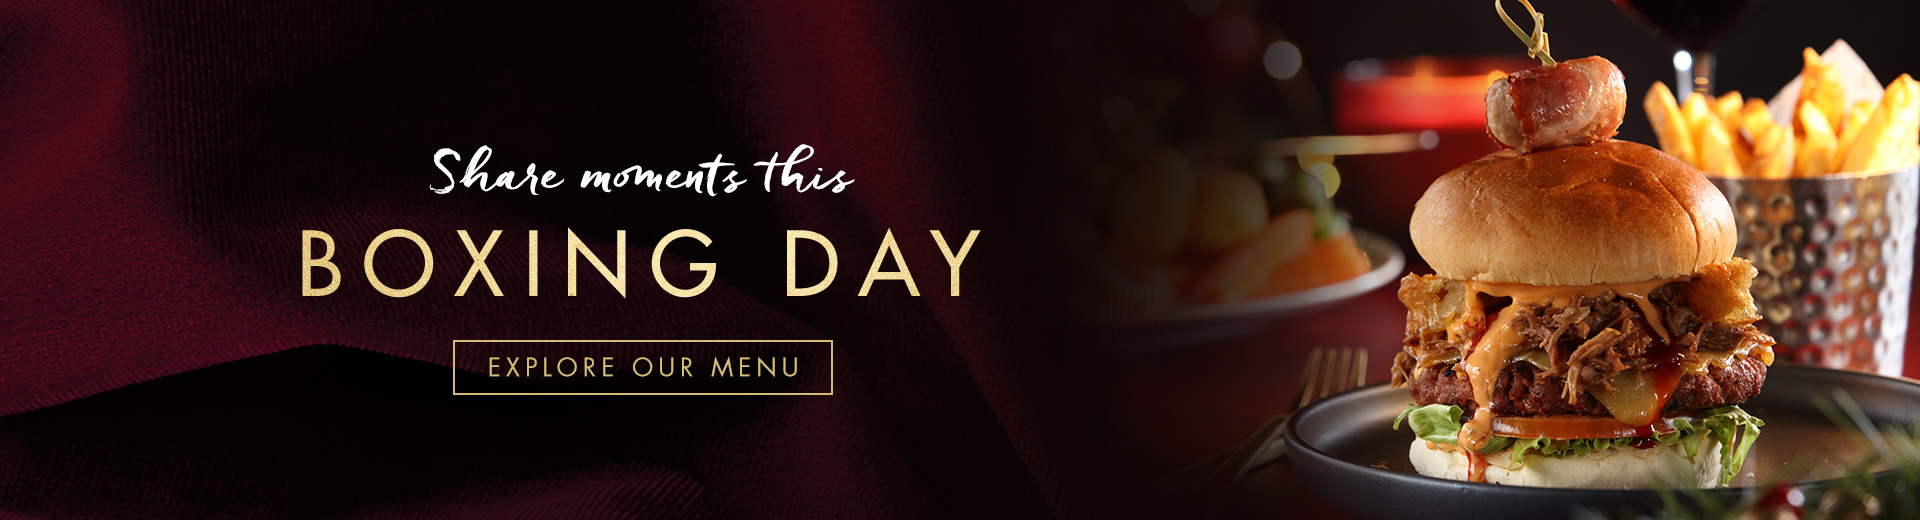 BOXING DAY MENU AT Miller & Carter Cardiff Hayes